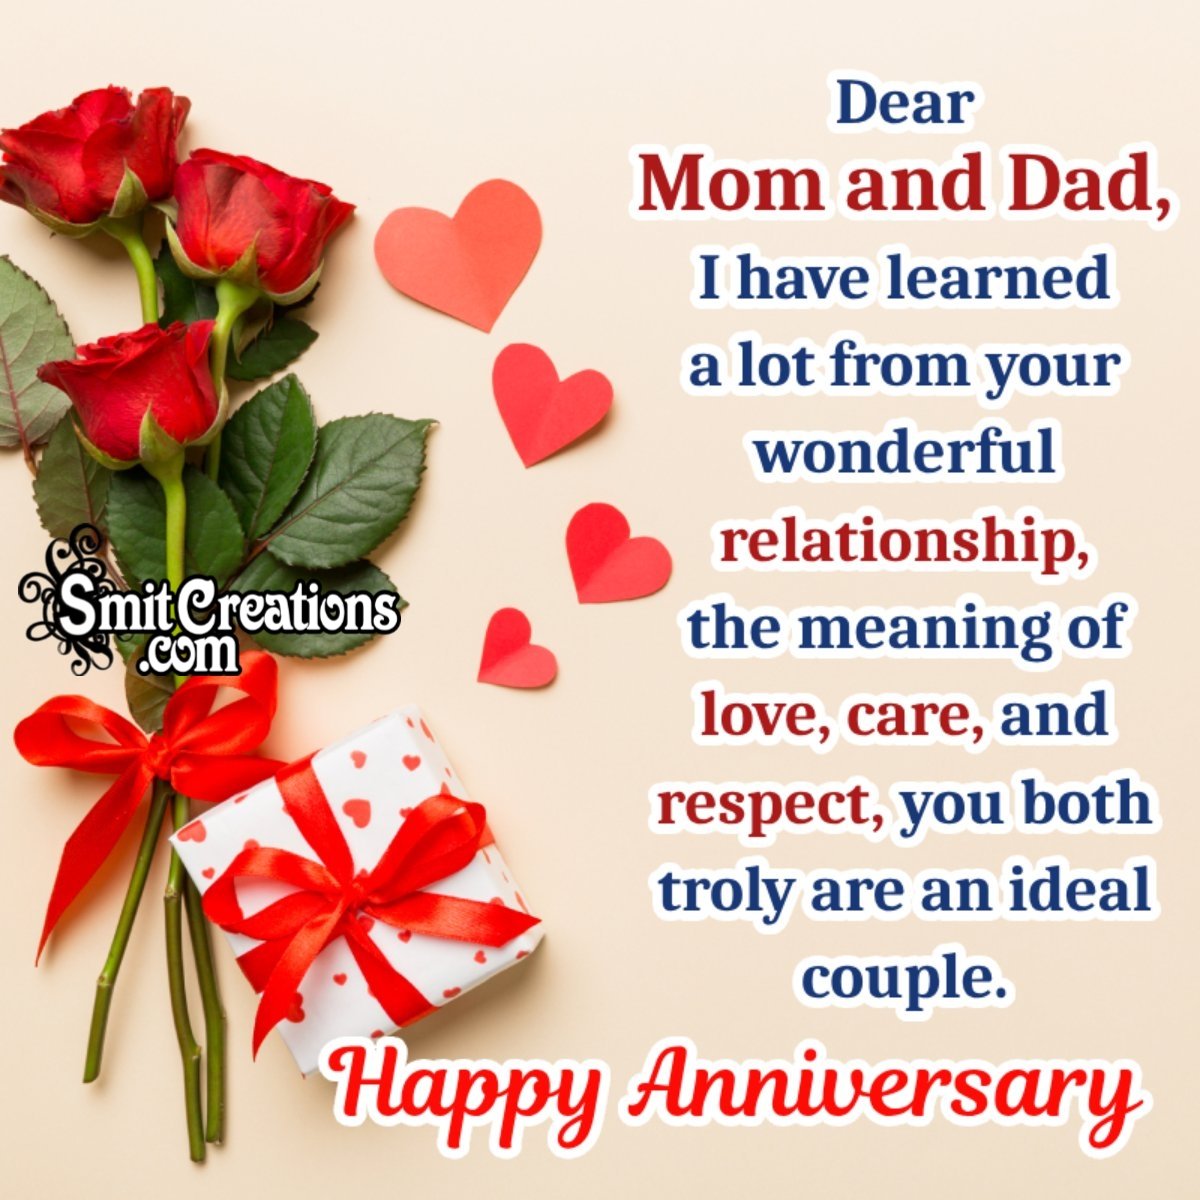 Happy Anniversary Message For Mom And Dad